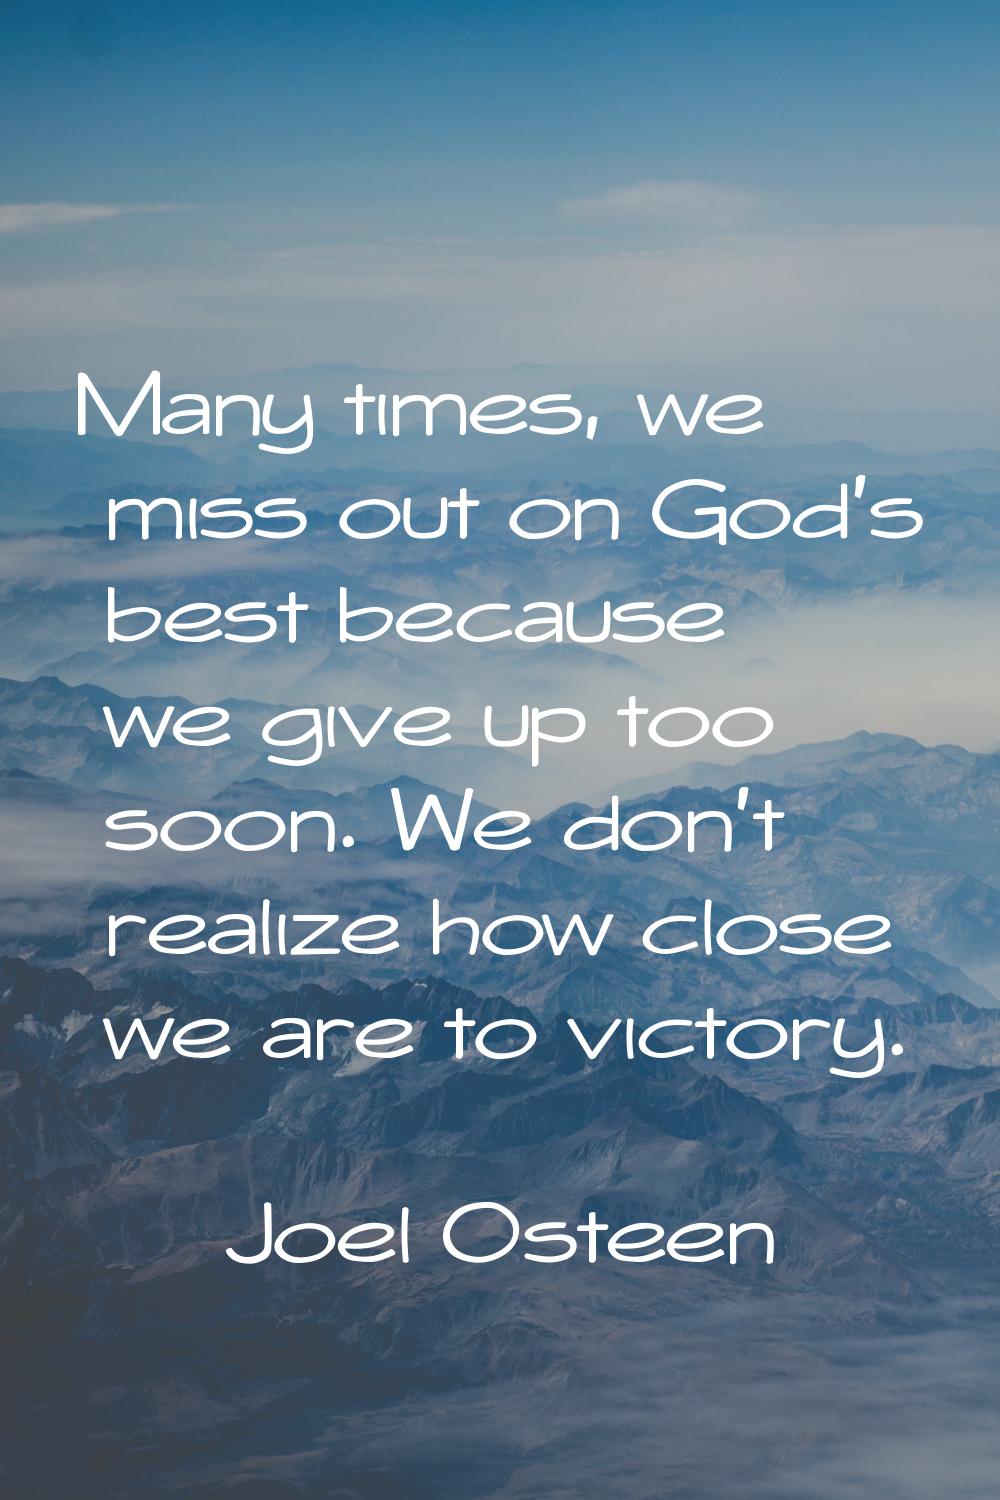 Many times, we miss out on God's best because we give up too soon. We don't realize how close we ar